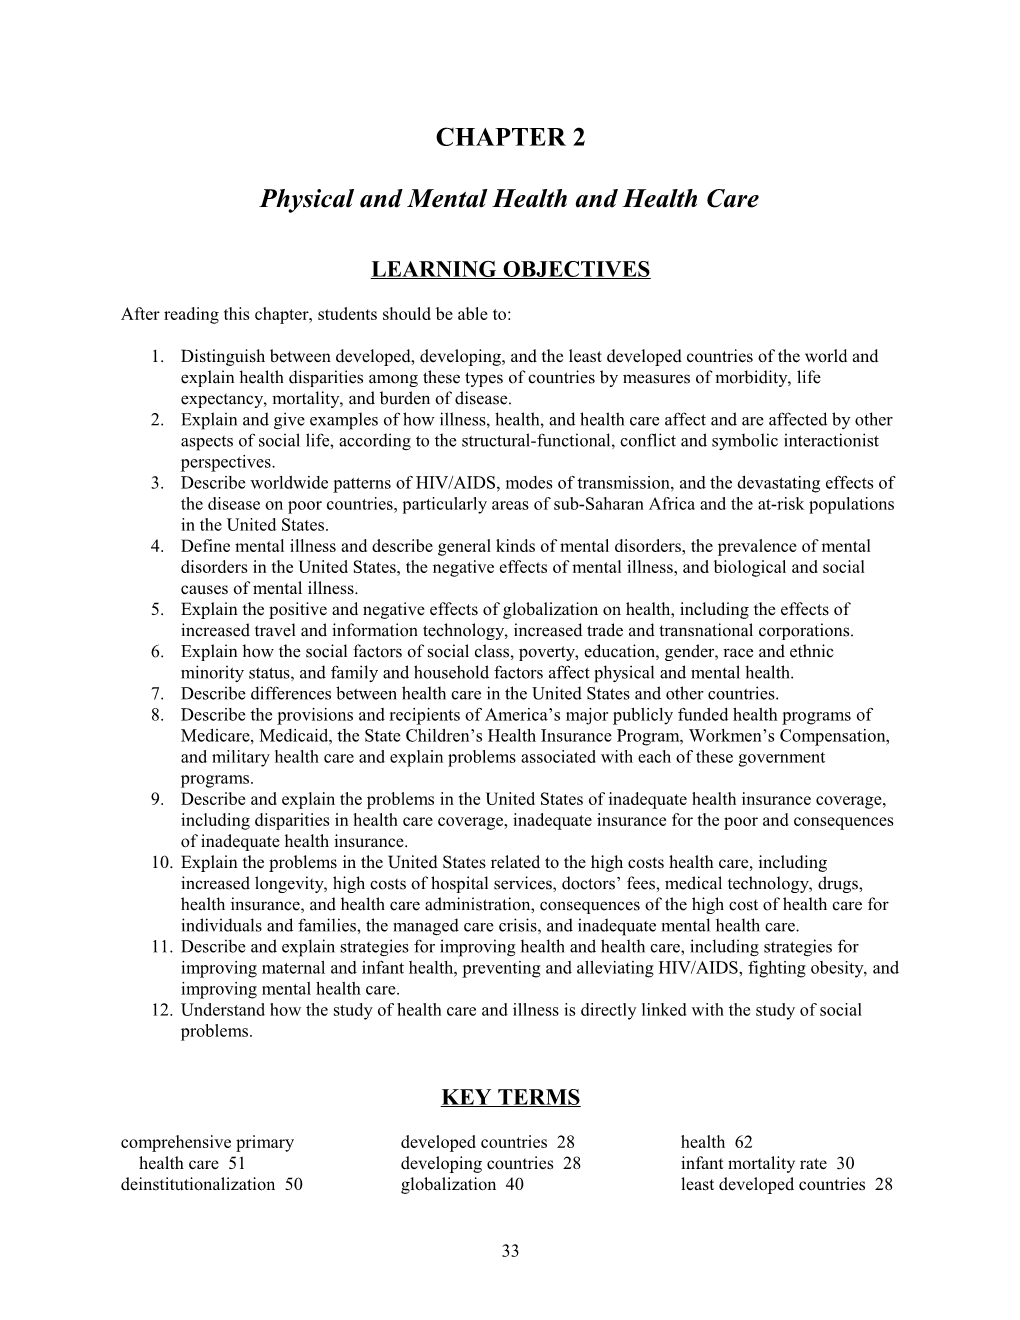 Physical and Mental Health and Health Care